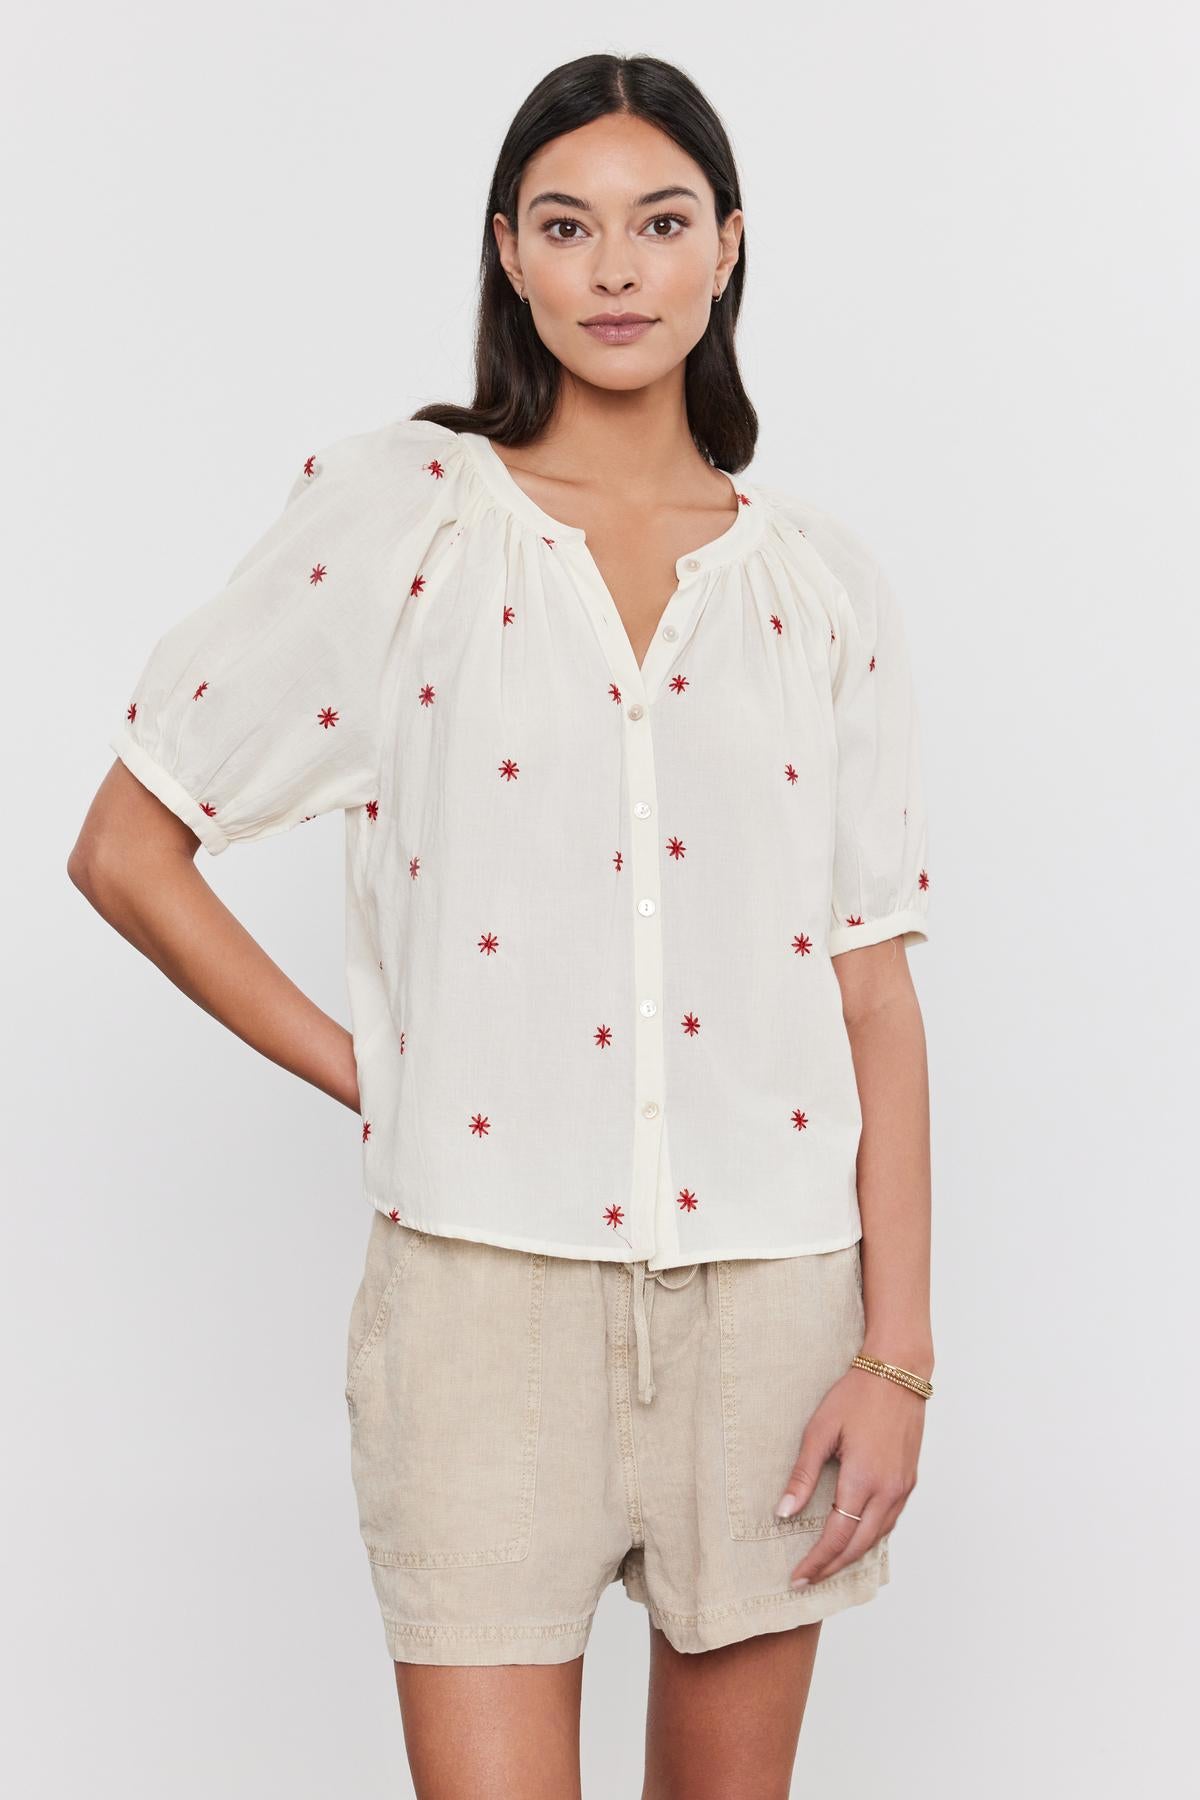   A woman wearing a white AMIRA TOP with red floral embroidery and beige shorts, standing against a plain background. Brand Name: Velvet by Graham & Spencer 